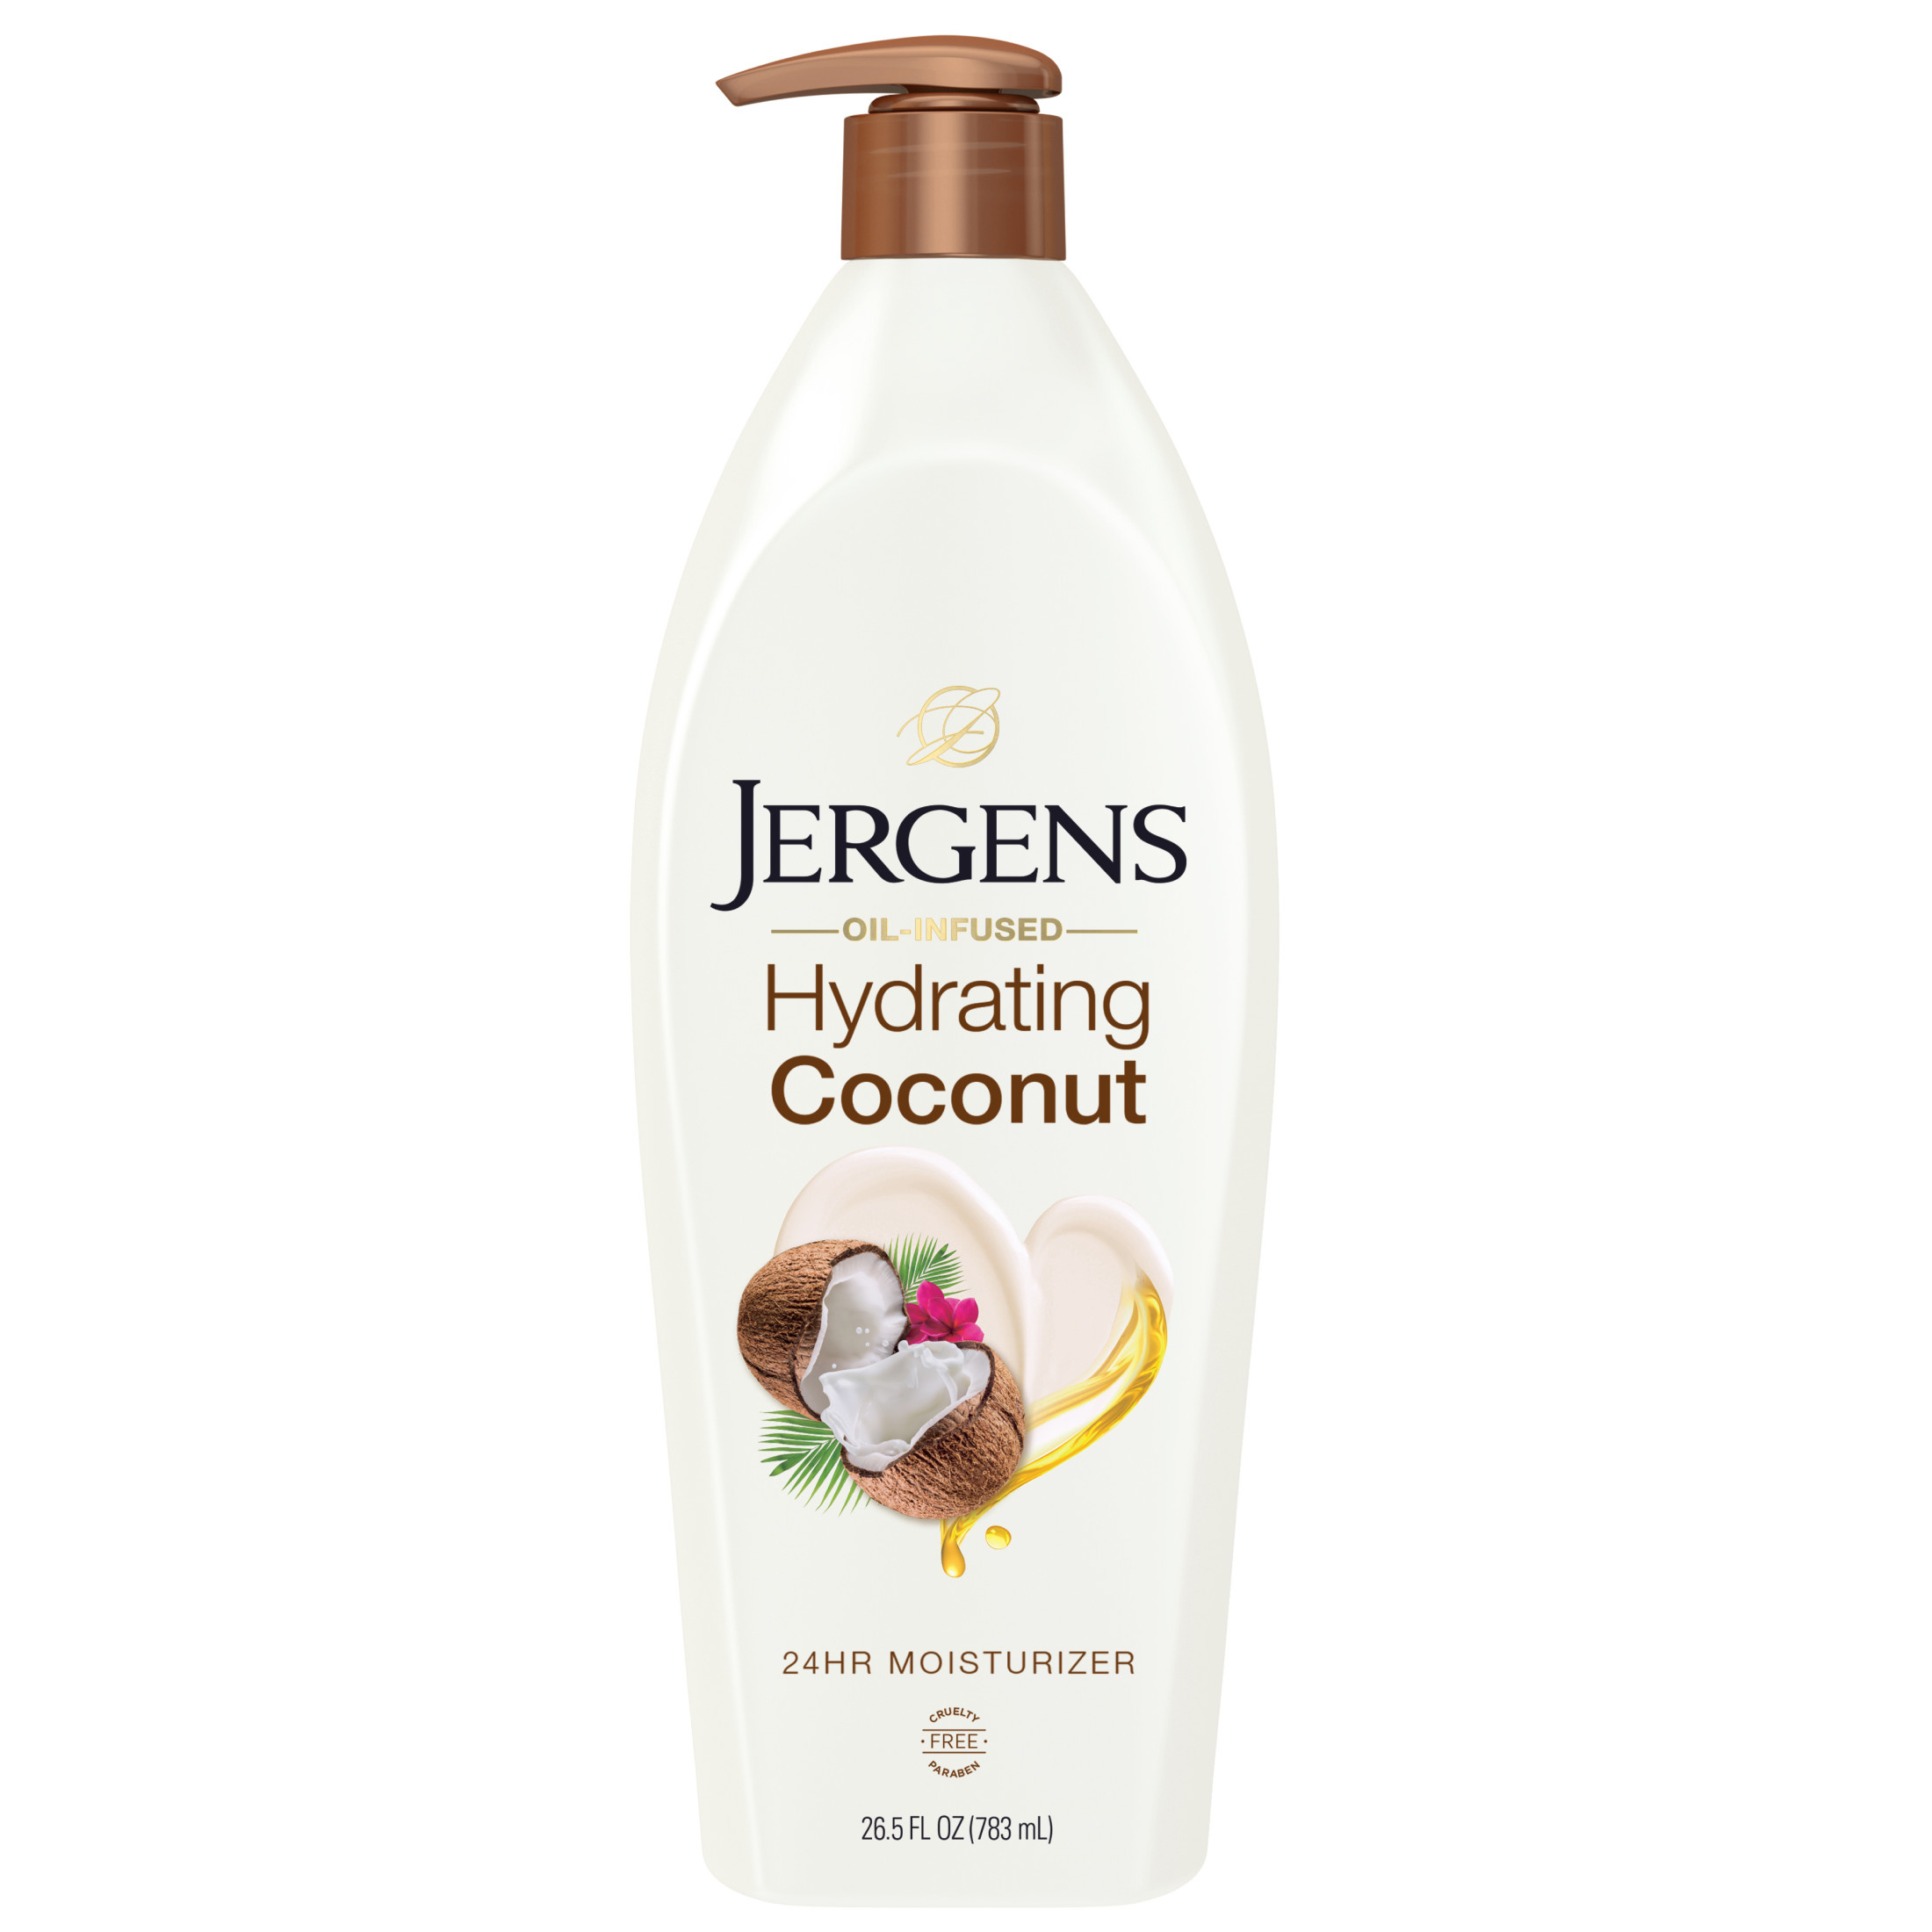 Jergens Hydrating Coconut Body Lotion, Lotion for Dry Skin, Dermatologist Tested, 26.5 Oz - image 1 of 10